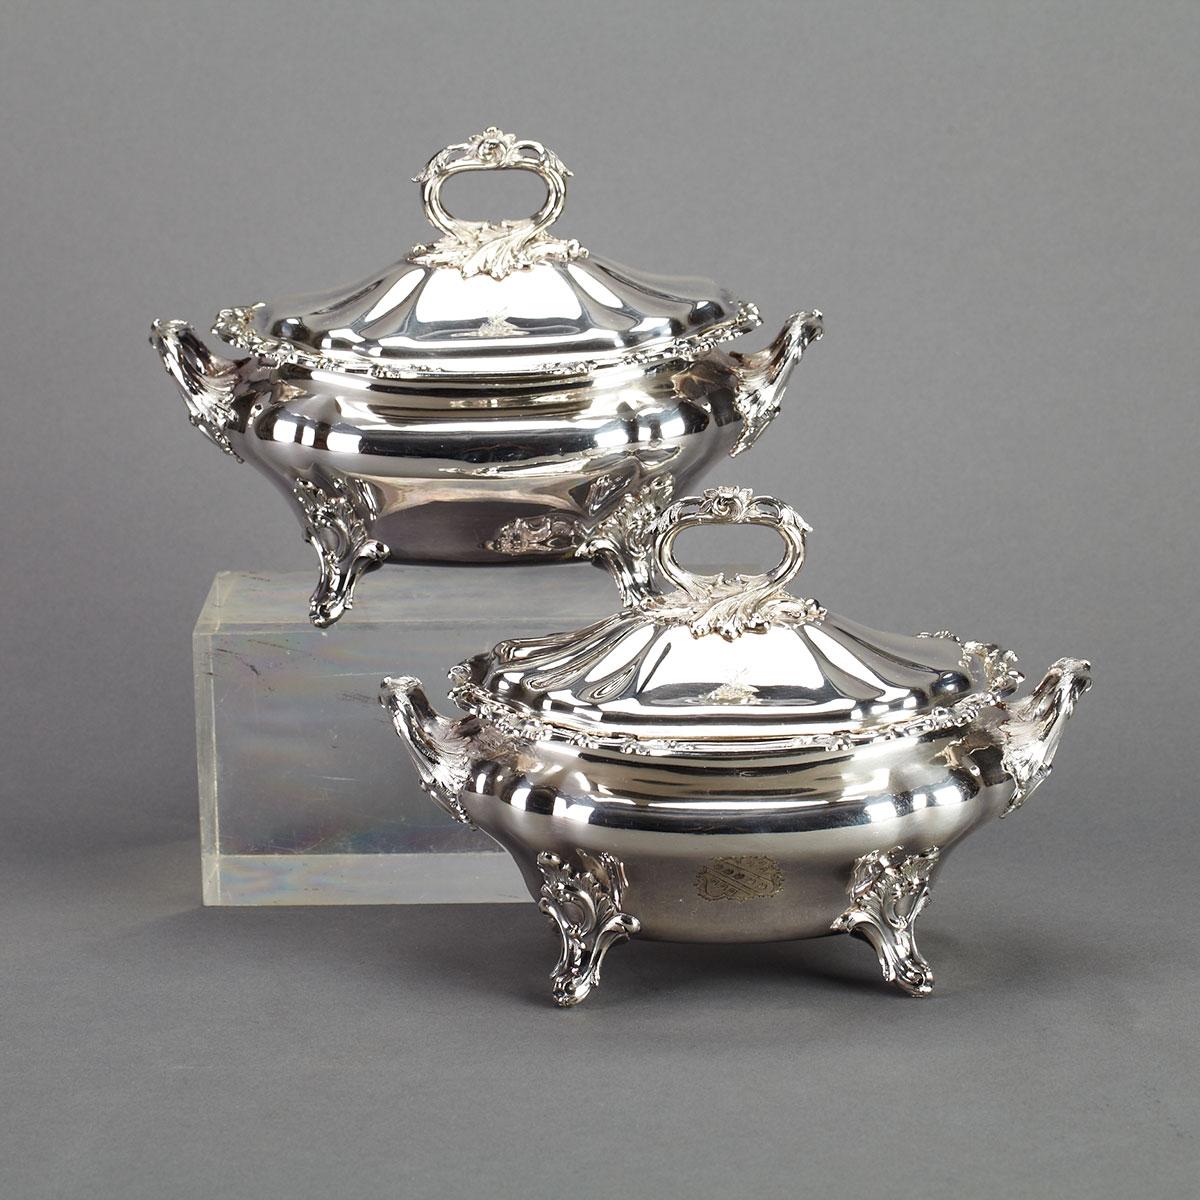 Pair of Victorian Silver Plated Covered Sauce Tureens, mid-19th century